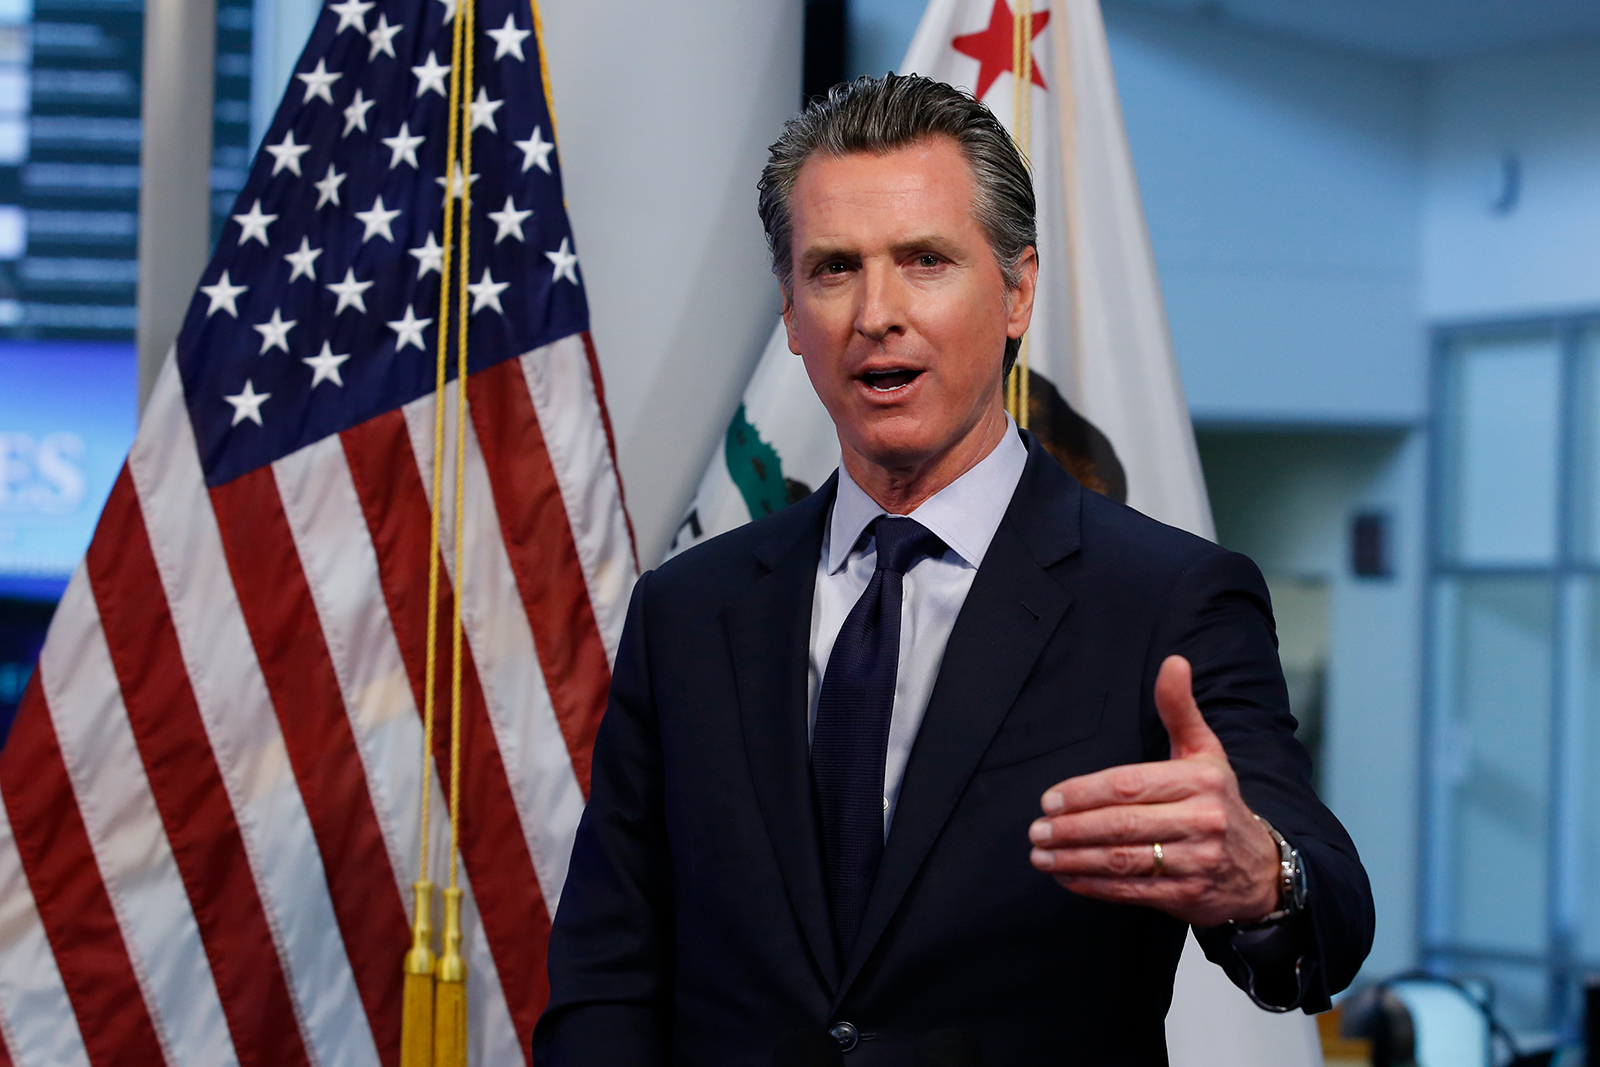 Gov. Gavin Newsom discusses an outline for what it will take to lift coronavirus restrictions during a news conference in Rancho Cordova, California on April 14.